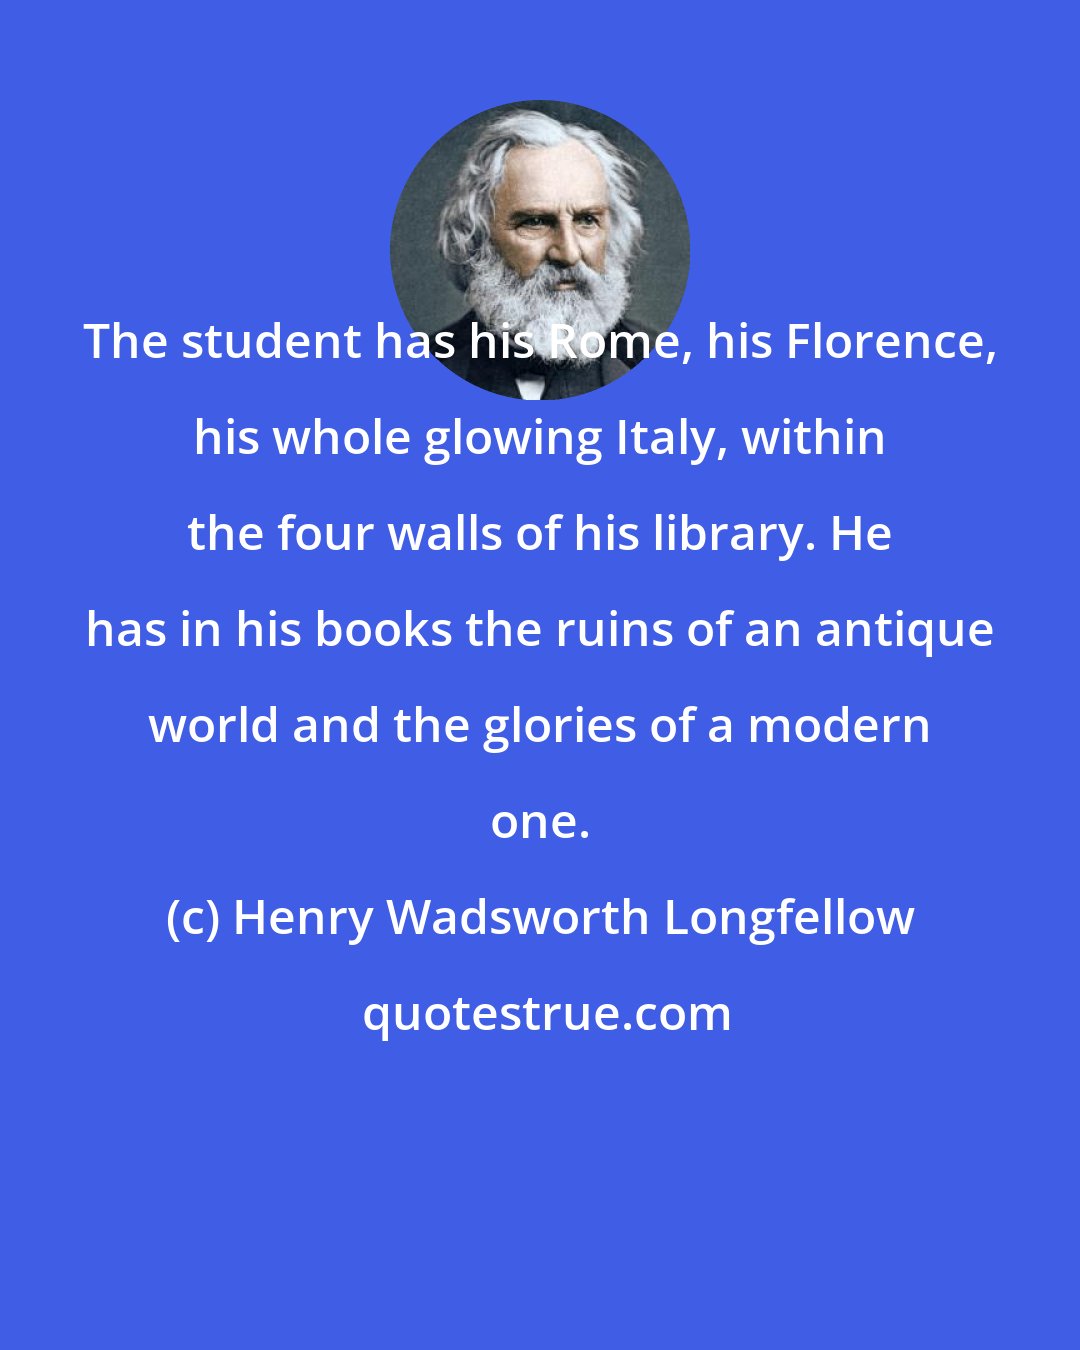 Henry Wadsworth Longfellow: The student has his Rome, his Florence, his whole glowing Italy, within the four walls of his library. He has in his books the ruins of an antique world and the glories of a modern one.